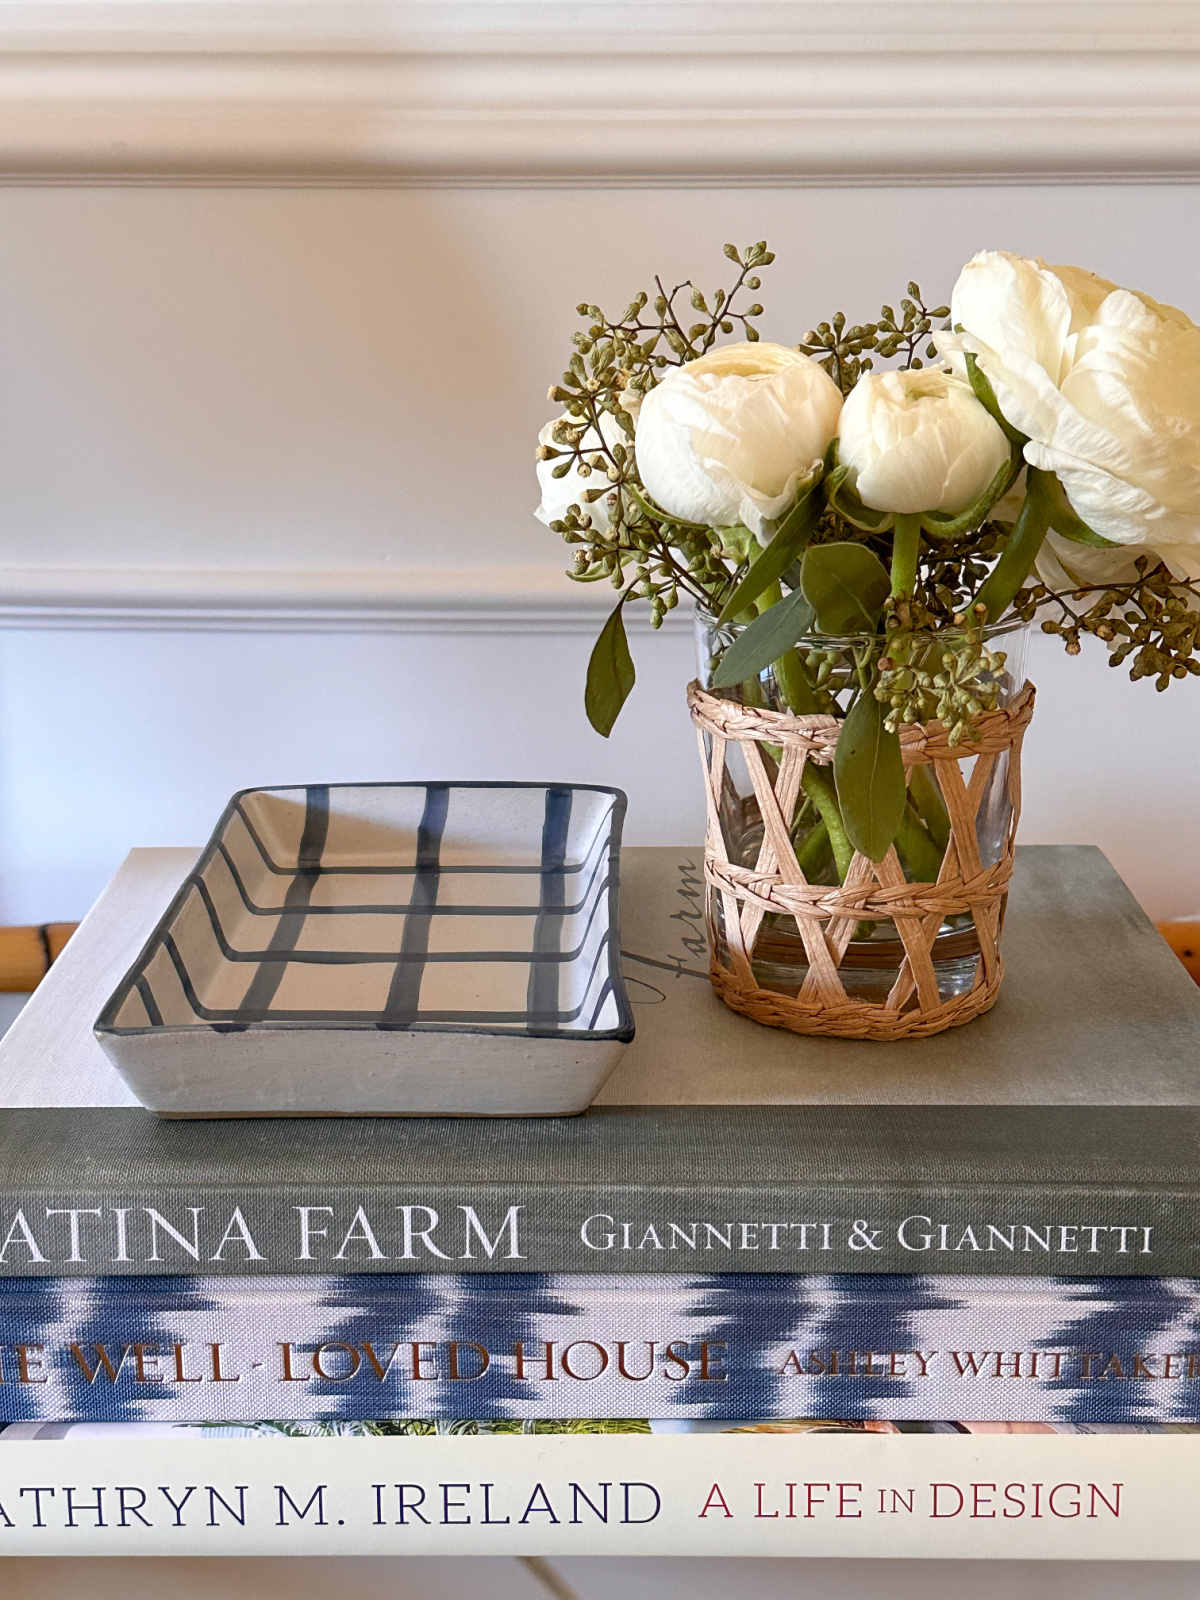 blue and white tray and woven flower vase sitting on books on entry table.